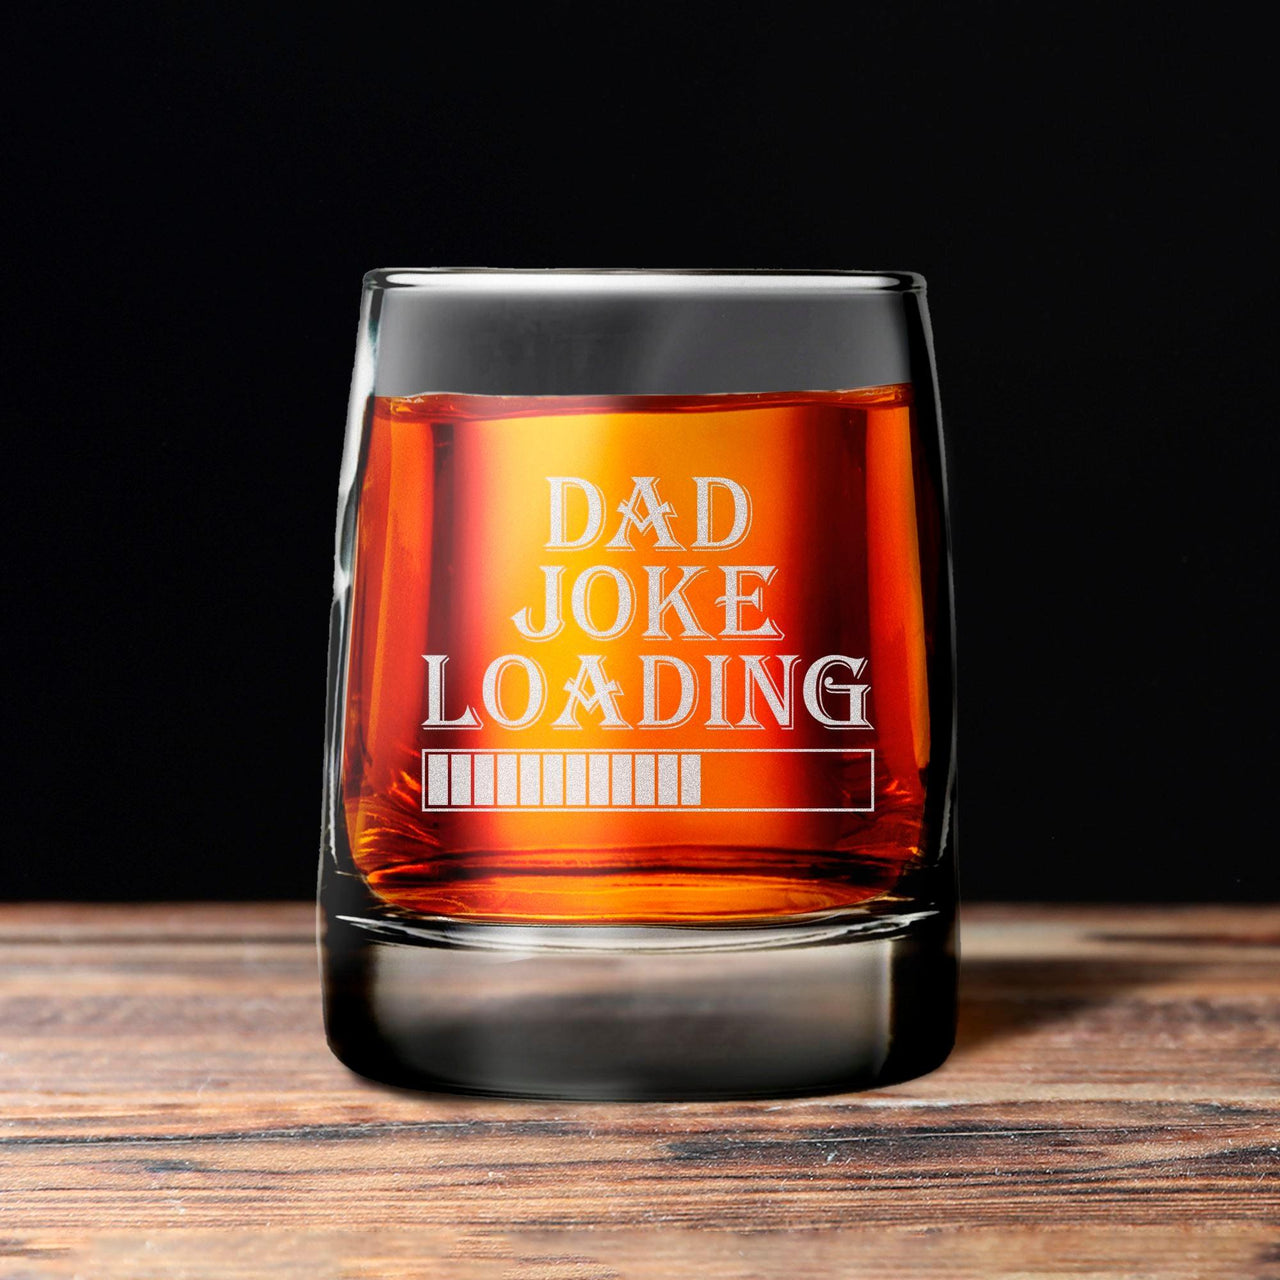 Old Fashioned 12 oz Whiskey Glass - Dad's Gift Personalized Drink Broquet Dad Joke Loading 